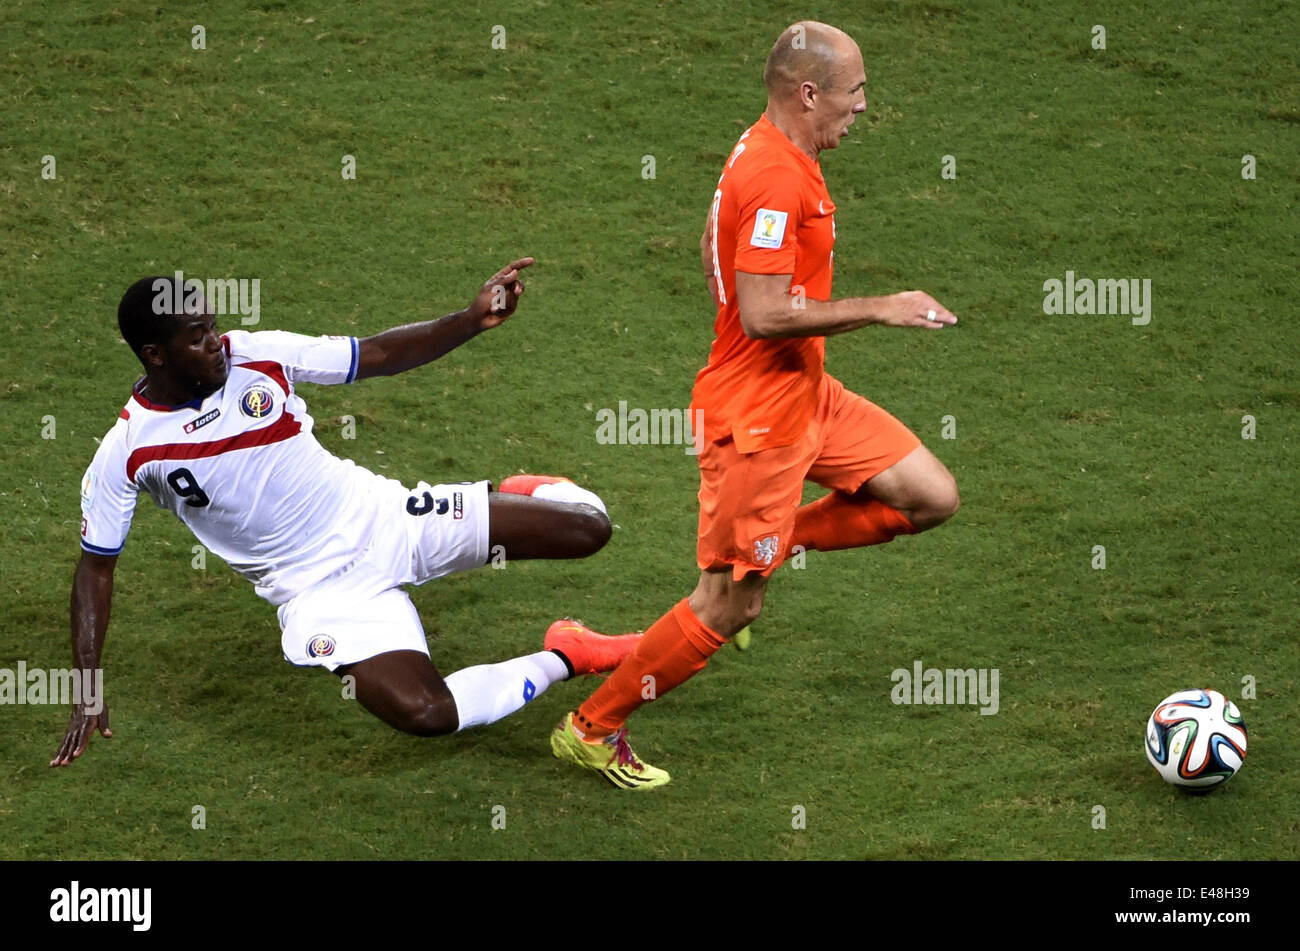 Salvador, Brazil. 5th July, 2014. Netherlands' Arjen Robben (R) breaks through the defense of Costa Rica's Joel Campbell during a quarter-finals match between Netherlands and Costa Rica of 2014 FIFA World Cup at the Arena Fonte Nova Stadium in Salvador, Brazil, on July 5, 2014. Credit:  Yang Lei/Xinhua/Alamy Live News Stock Photo